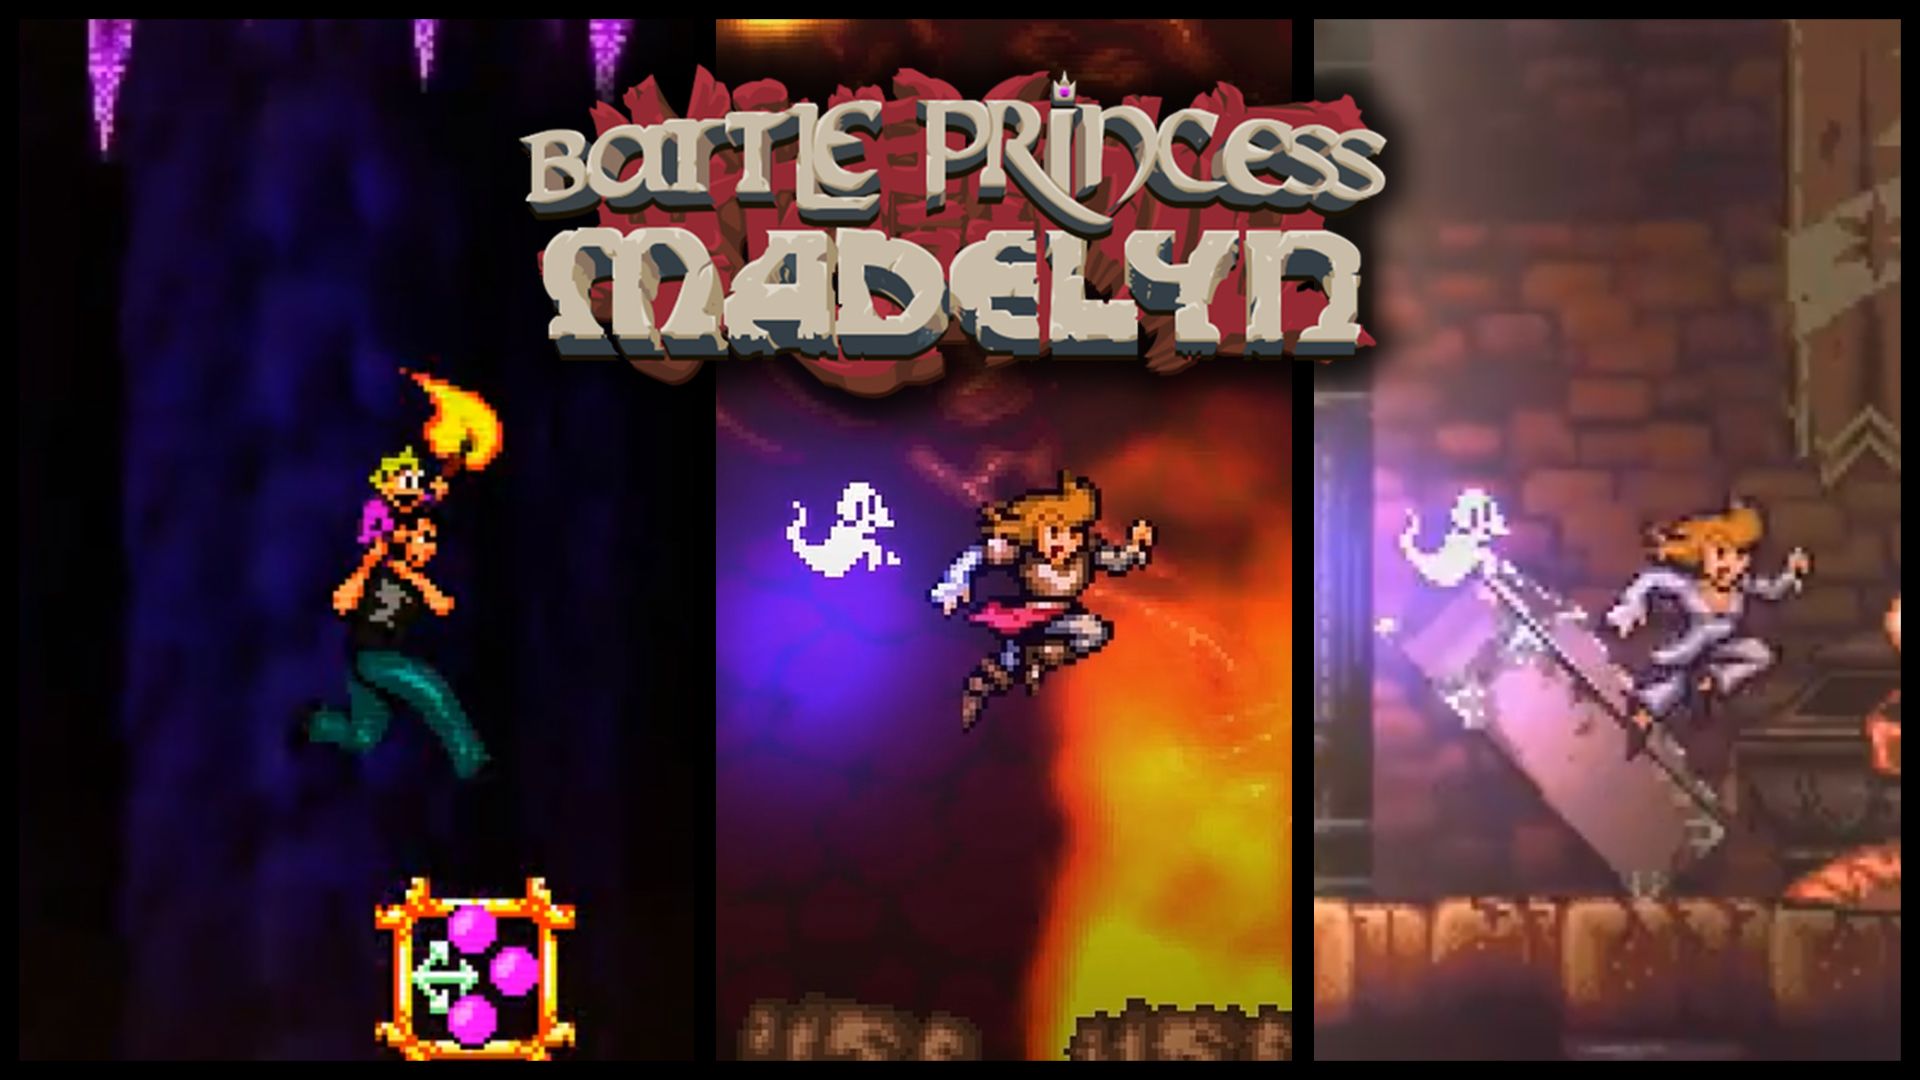 Battle Princess Madelyn Causal Bit Games PR Hound Picked Games Nintendo Switch PC PS4 Xbox One